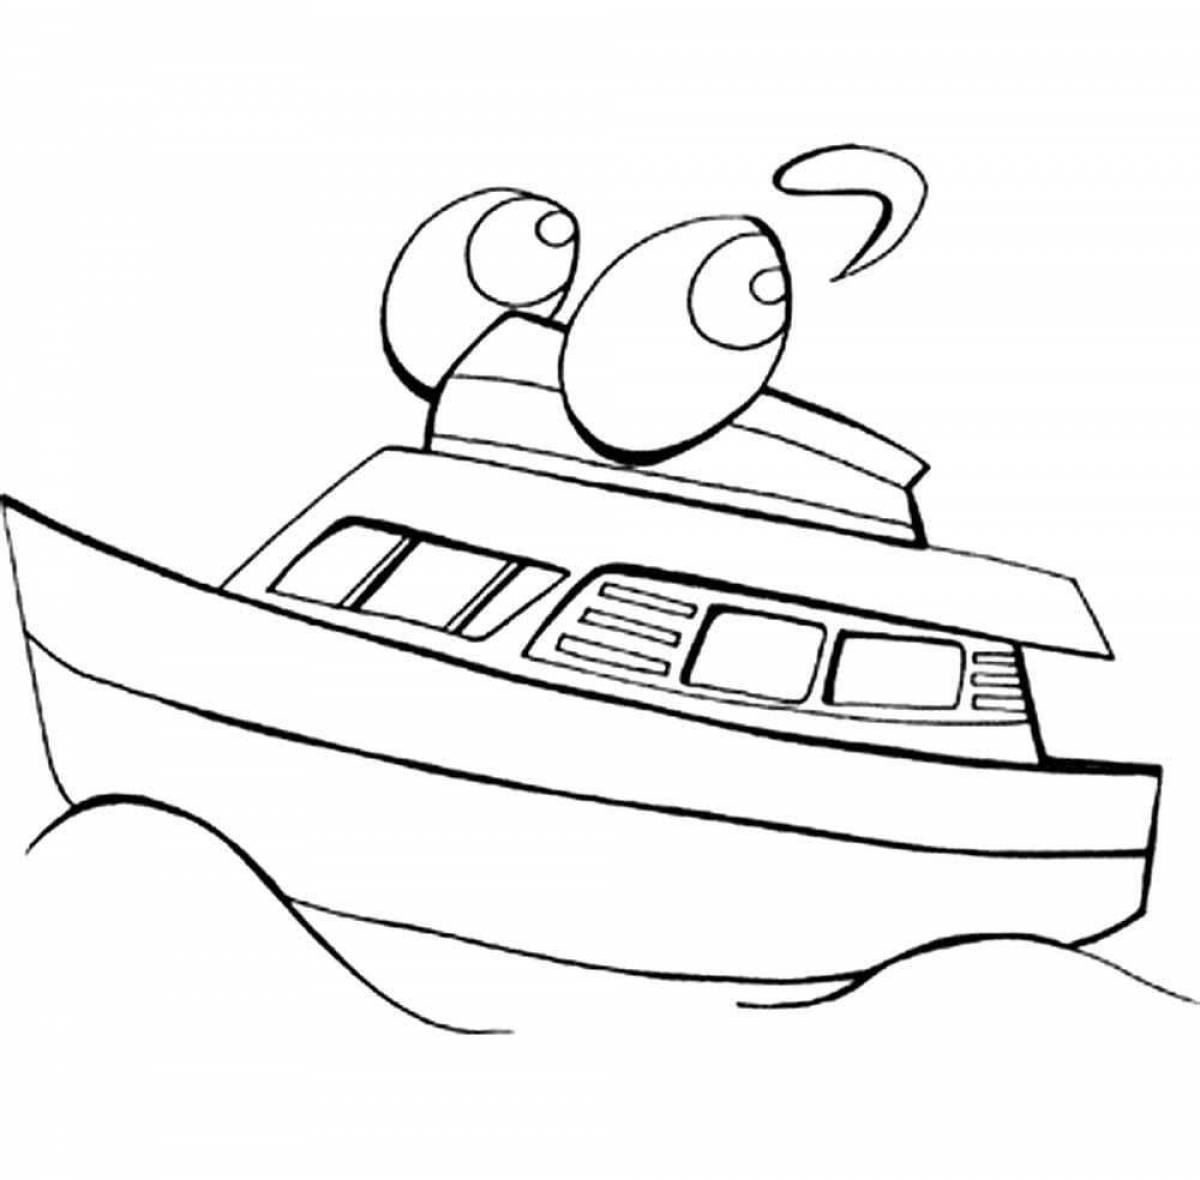 Great boat coloring page